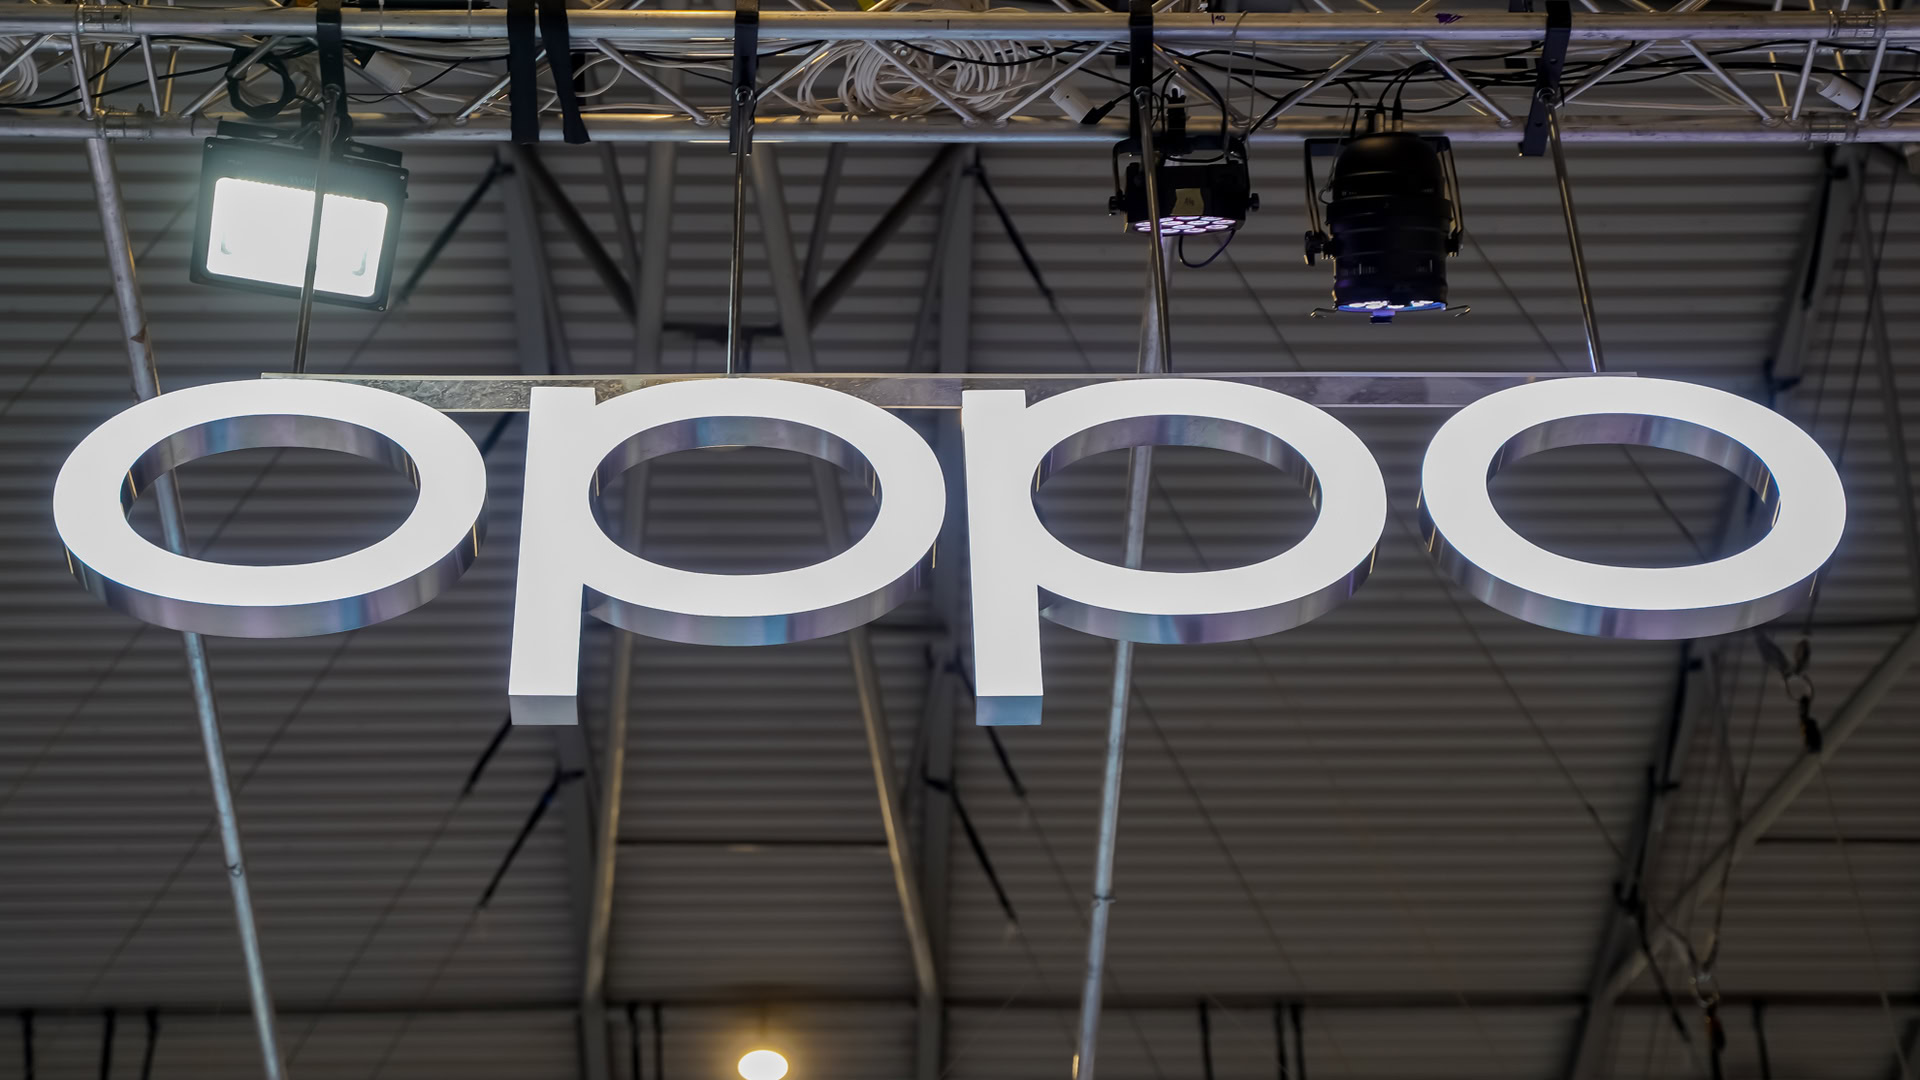 OPPO will bring AI to all of its phones, not just flagships